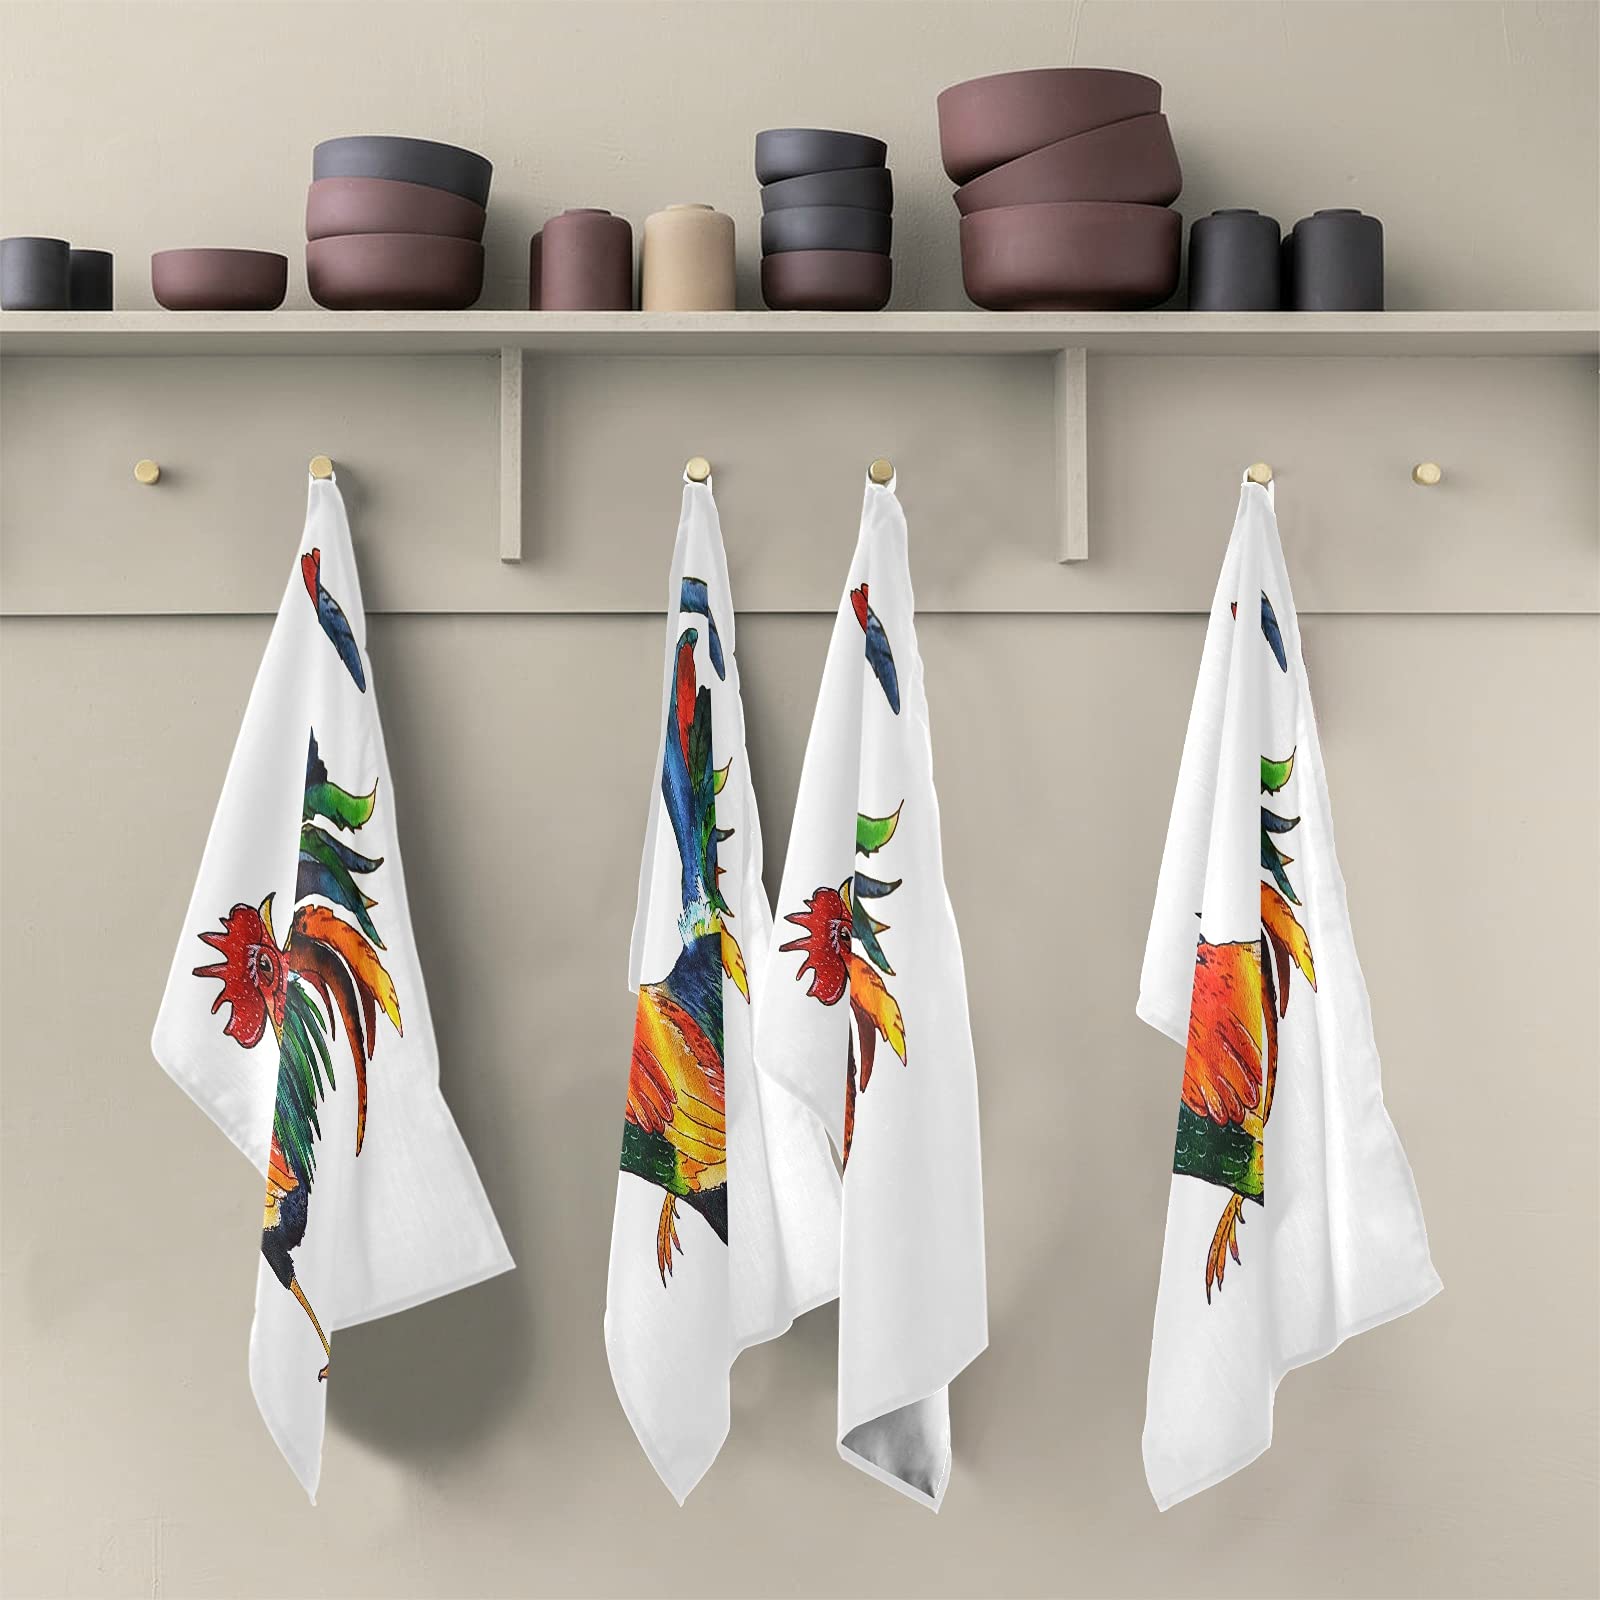 ALAZA Colorful Rooster White Kitchen Towels Dish Bar Tea Towel Dishcloths 1 Pack Super Absorbent Soft 18 x 28 inches